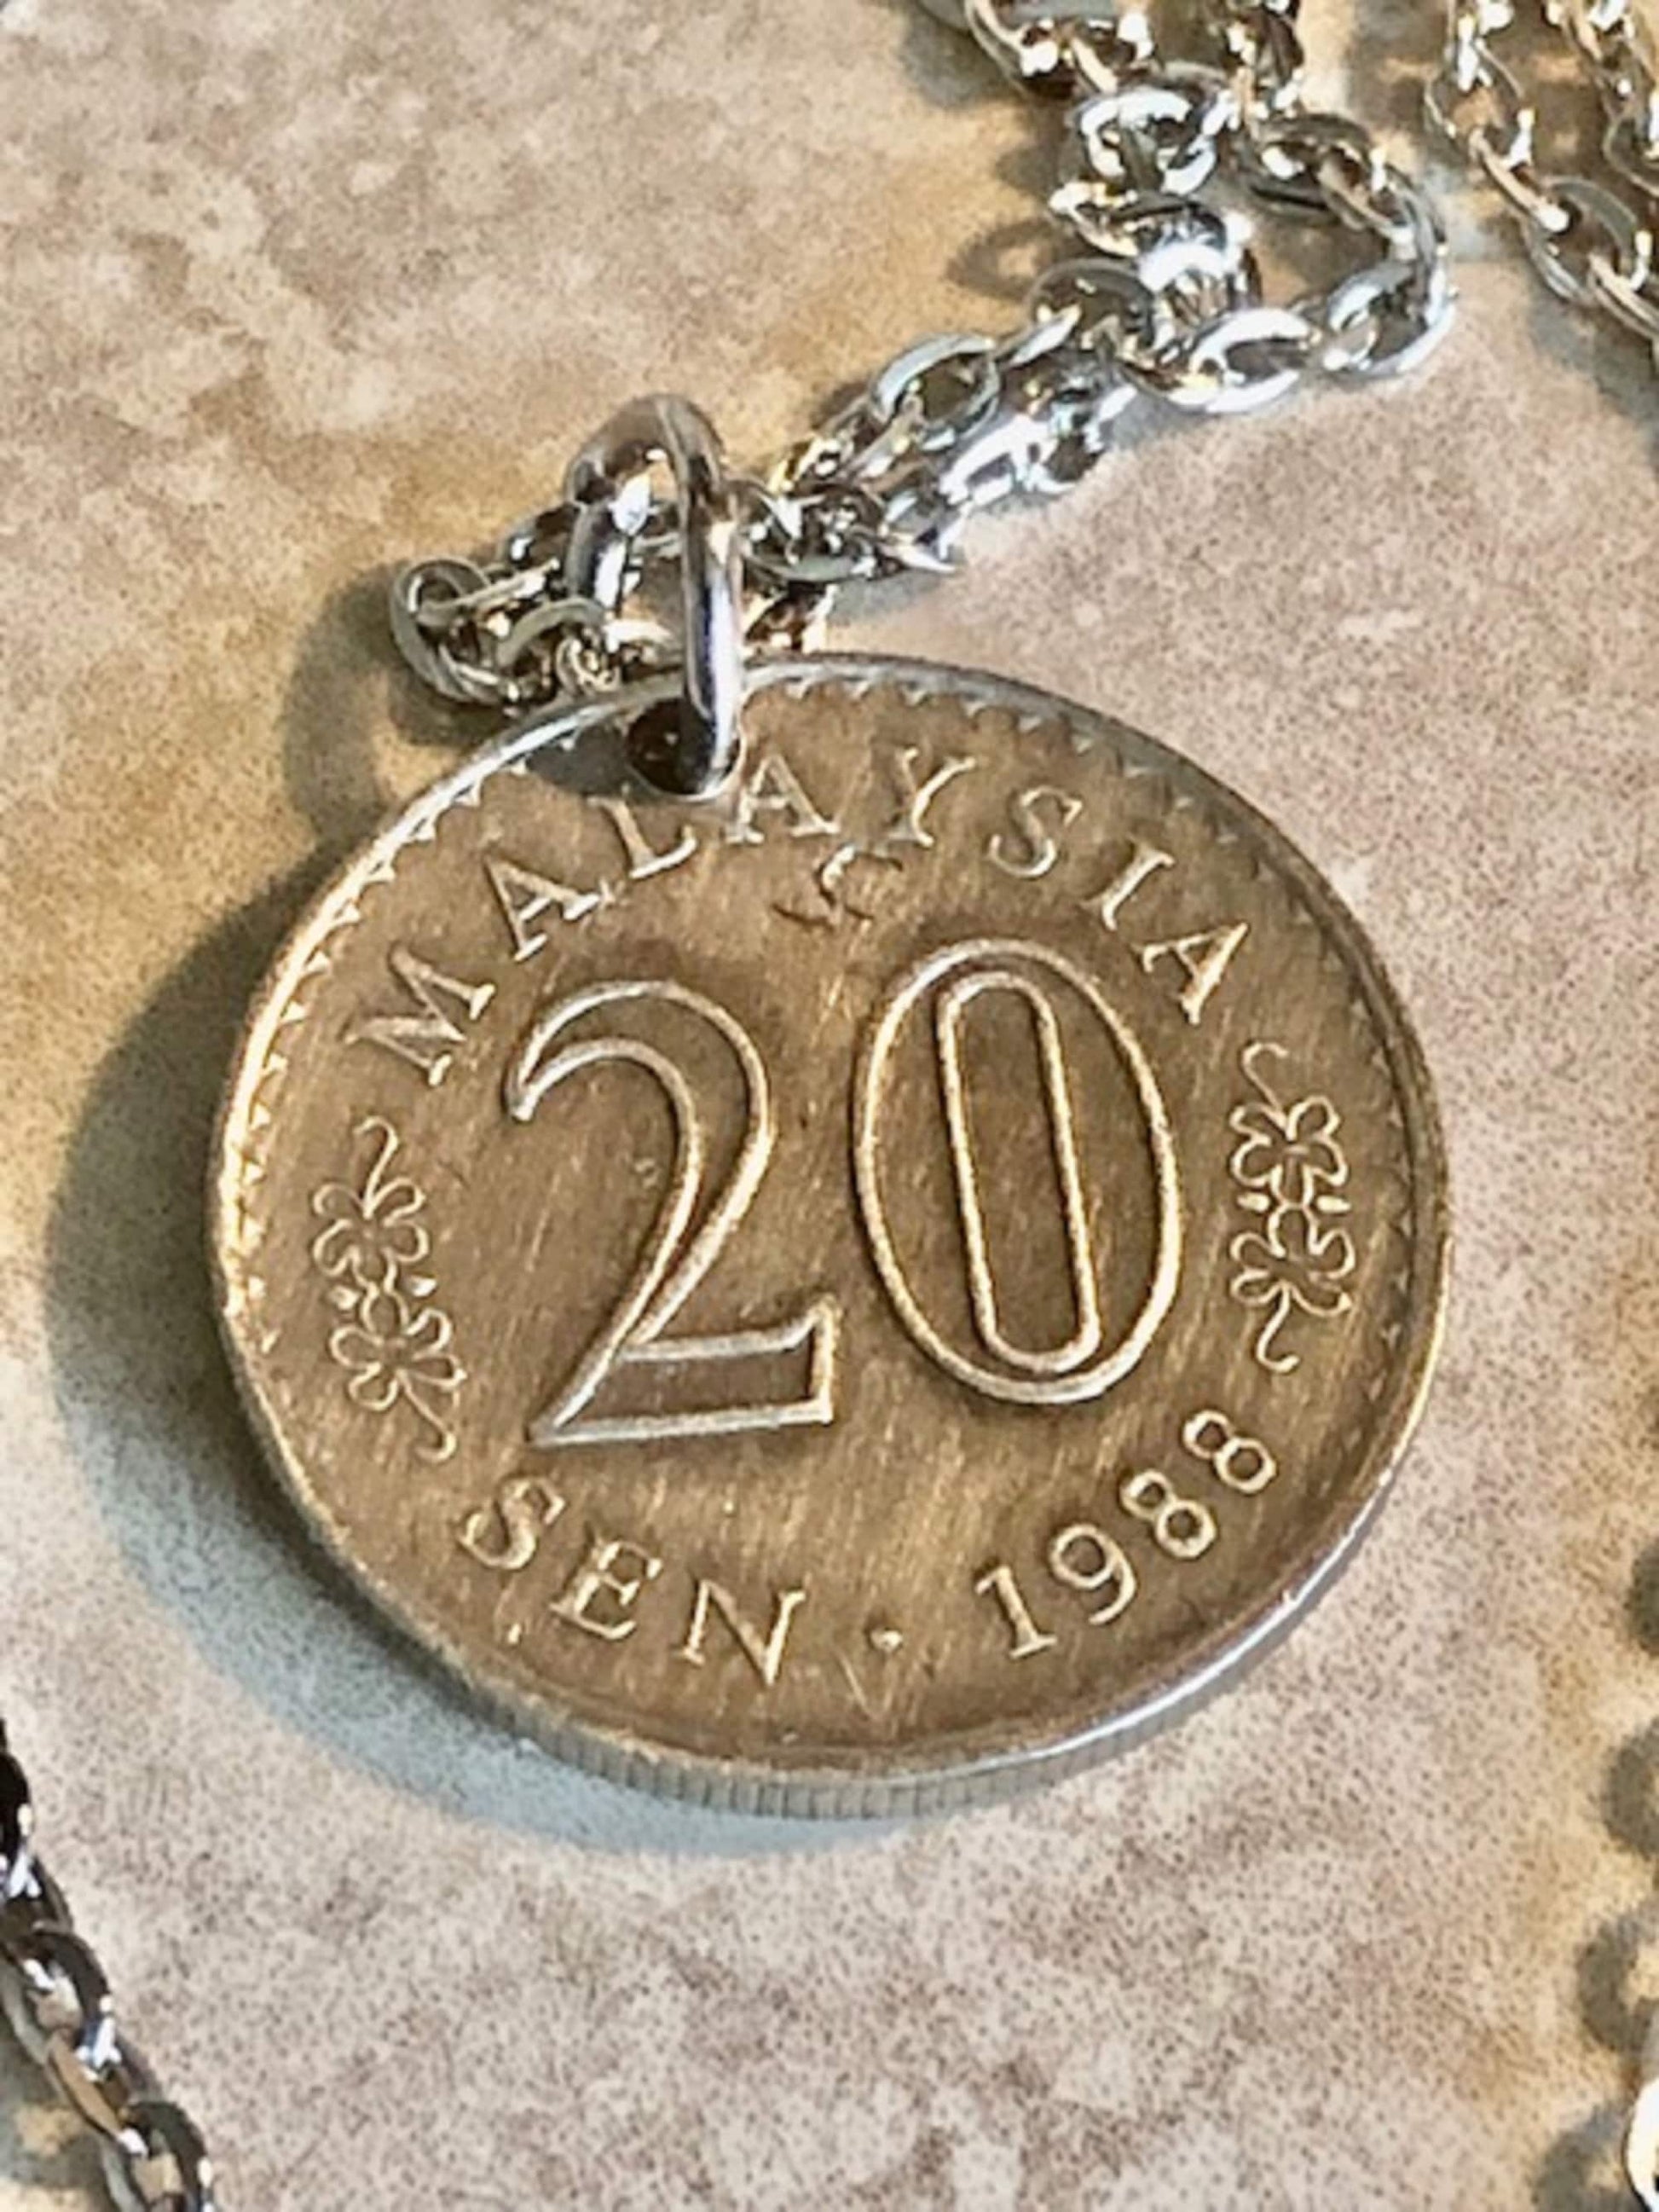 Malaysia Coin 20 Sen Pendant Necklace Custom Personal Necklace Vintage Handmade Jewelry Gift Friend Charm For Him Her World Coin Collector